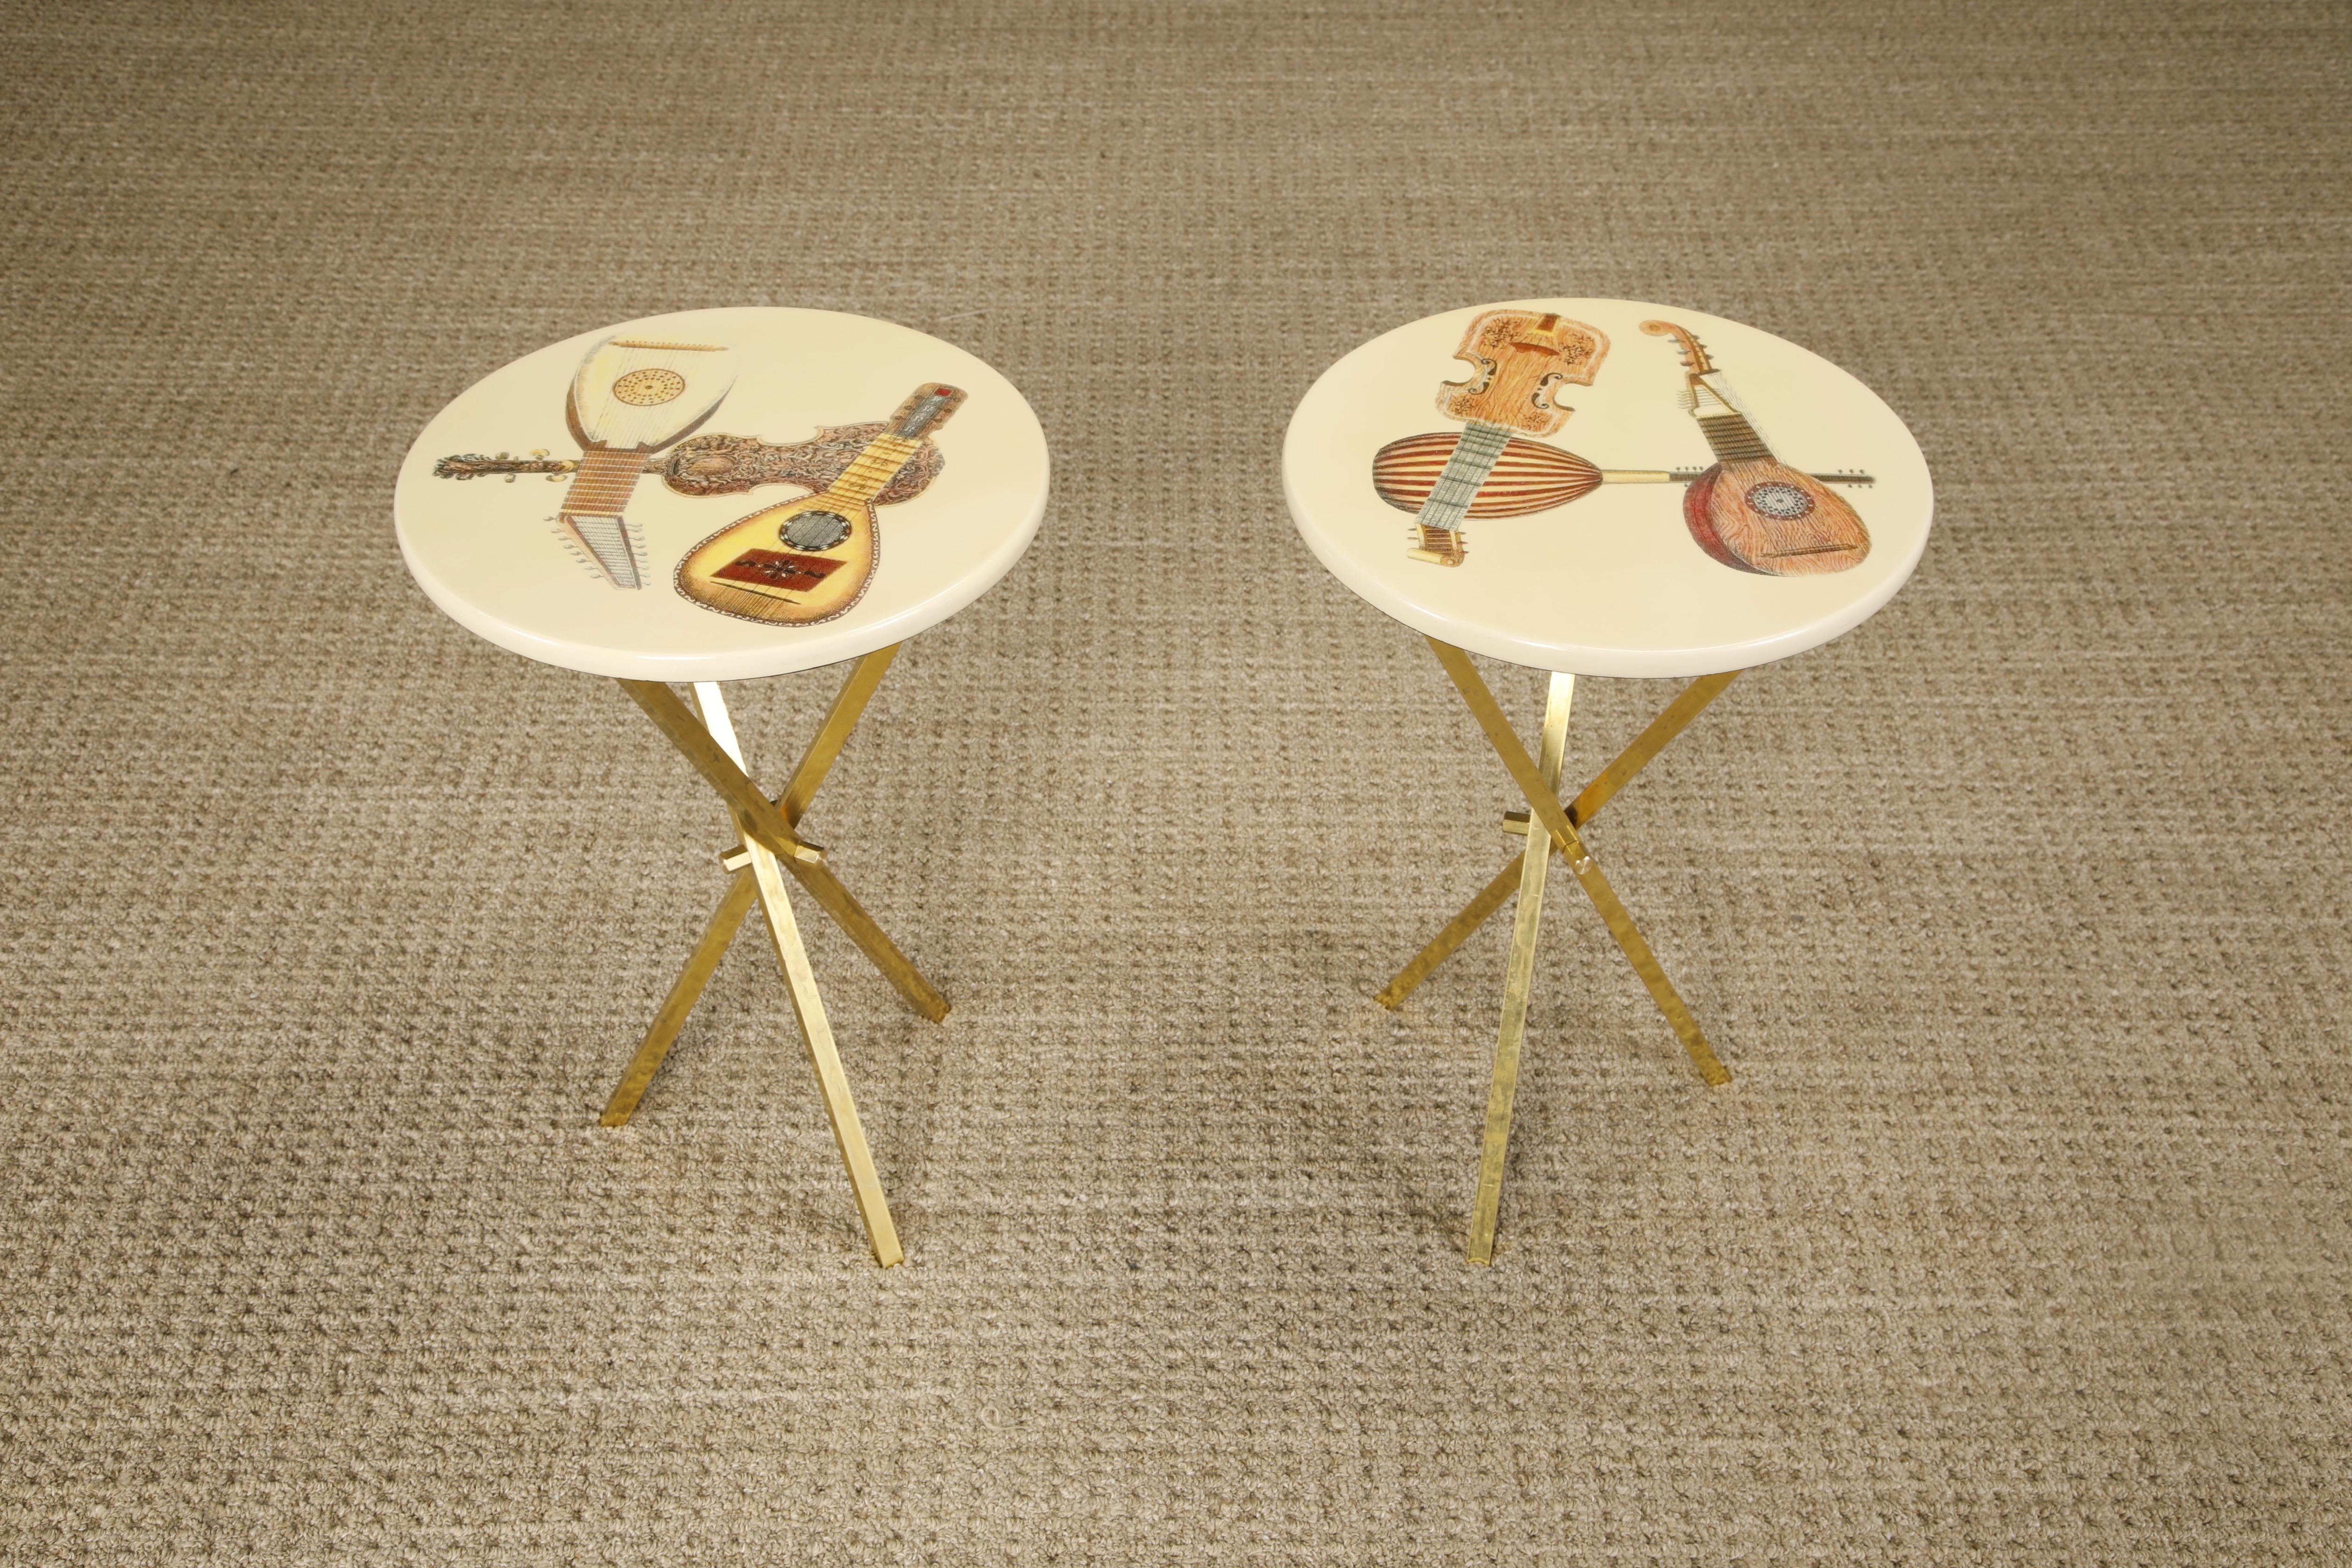 These gorgeous collectors items are the 'Strumenti Musicali' (Musical Instruments in Italian) side tables by Piero Fornasetti, signed underneath with original labels. Priced individually, we have two available. 

This pair of drinks / side tables